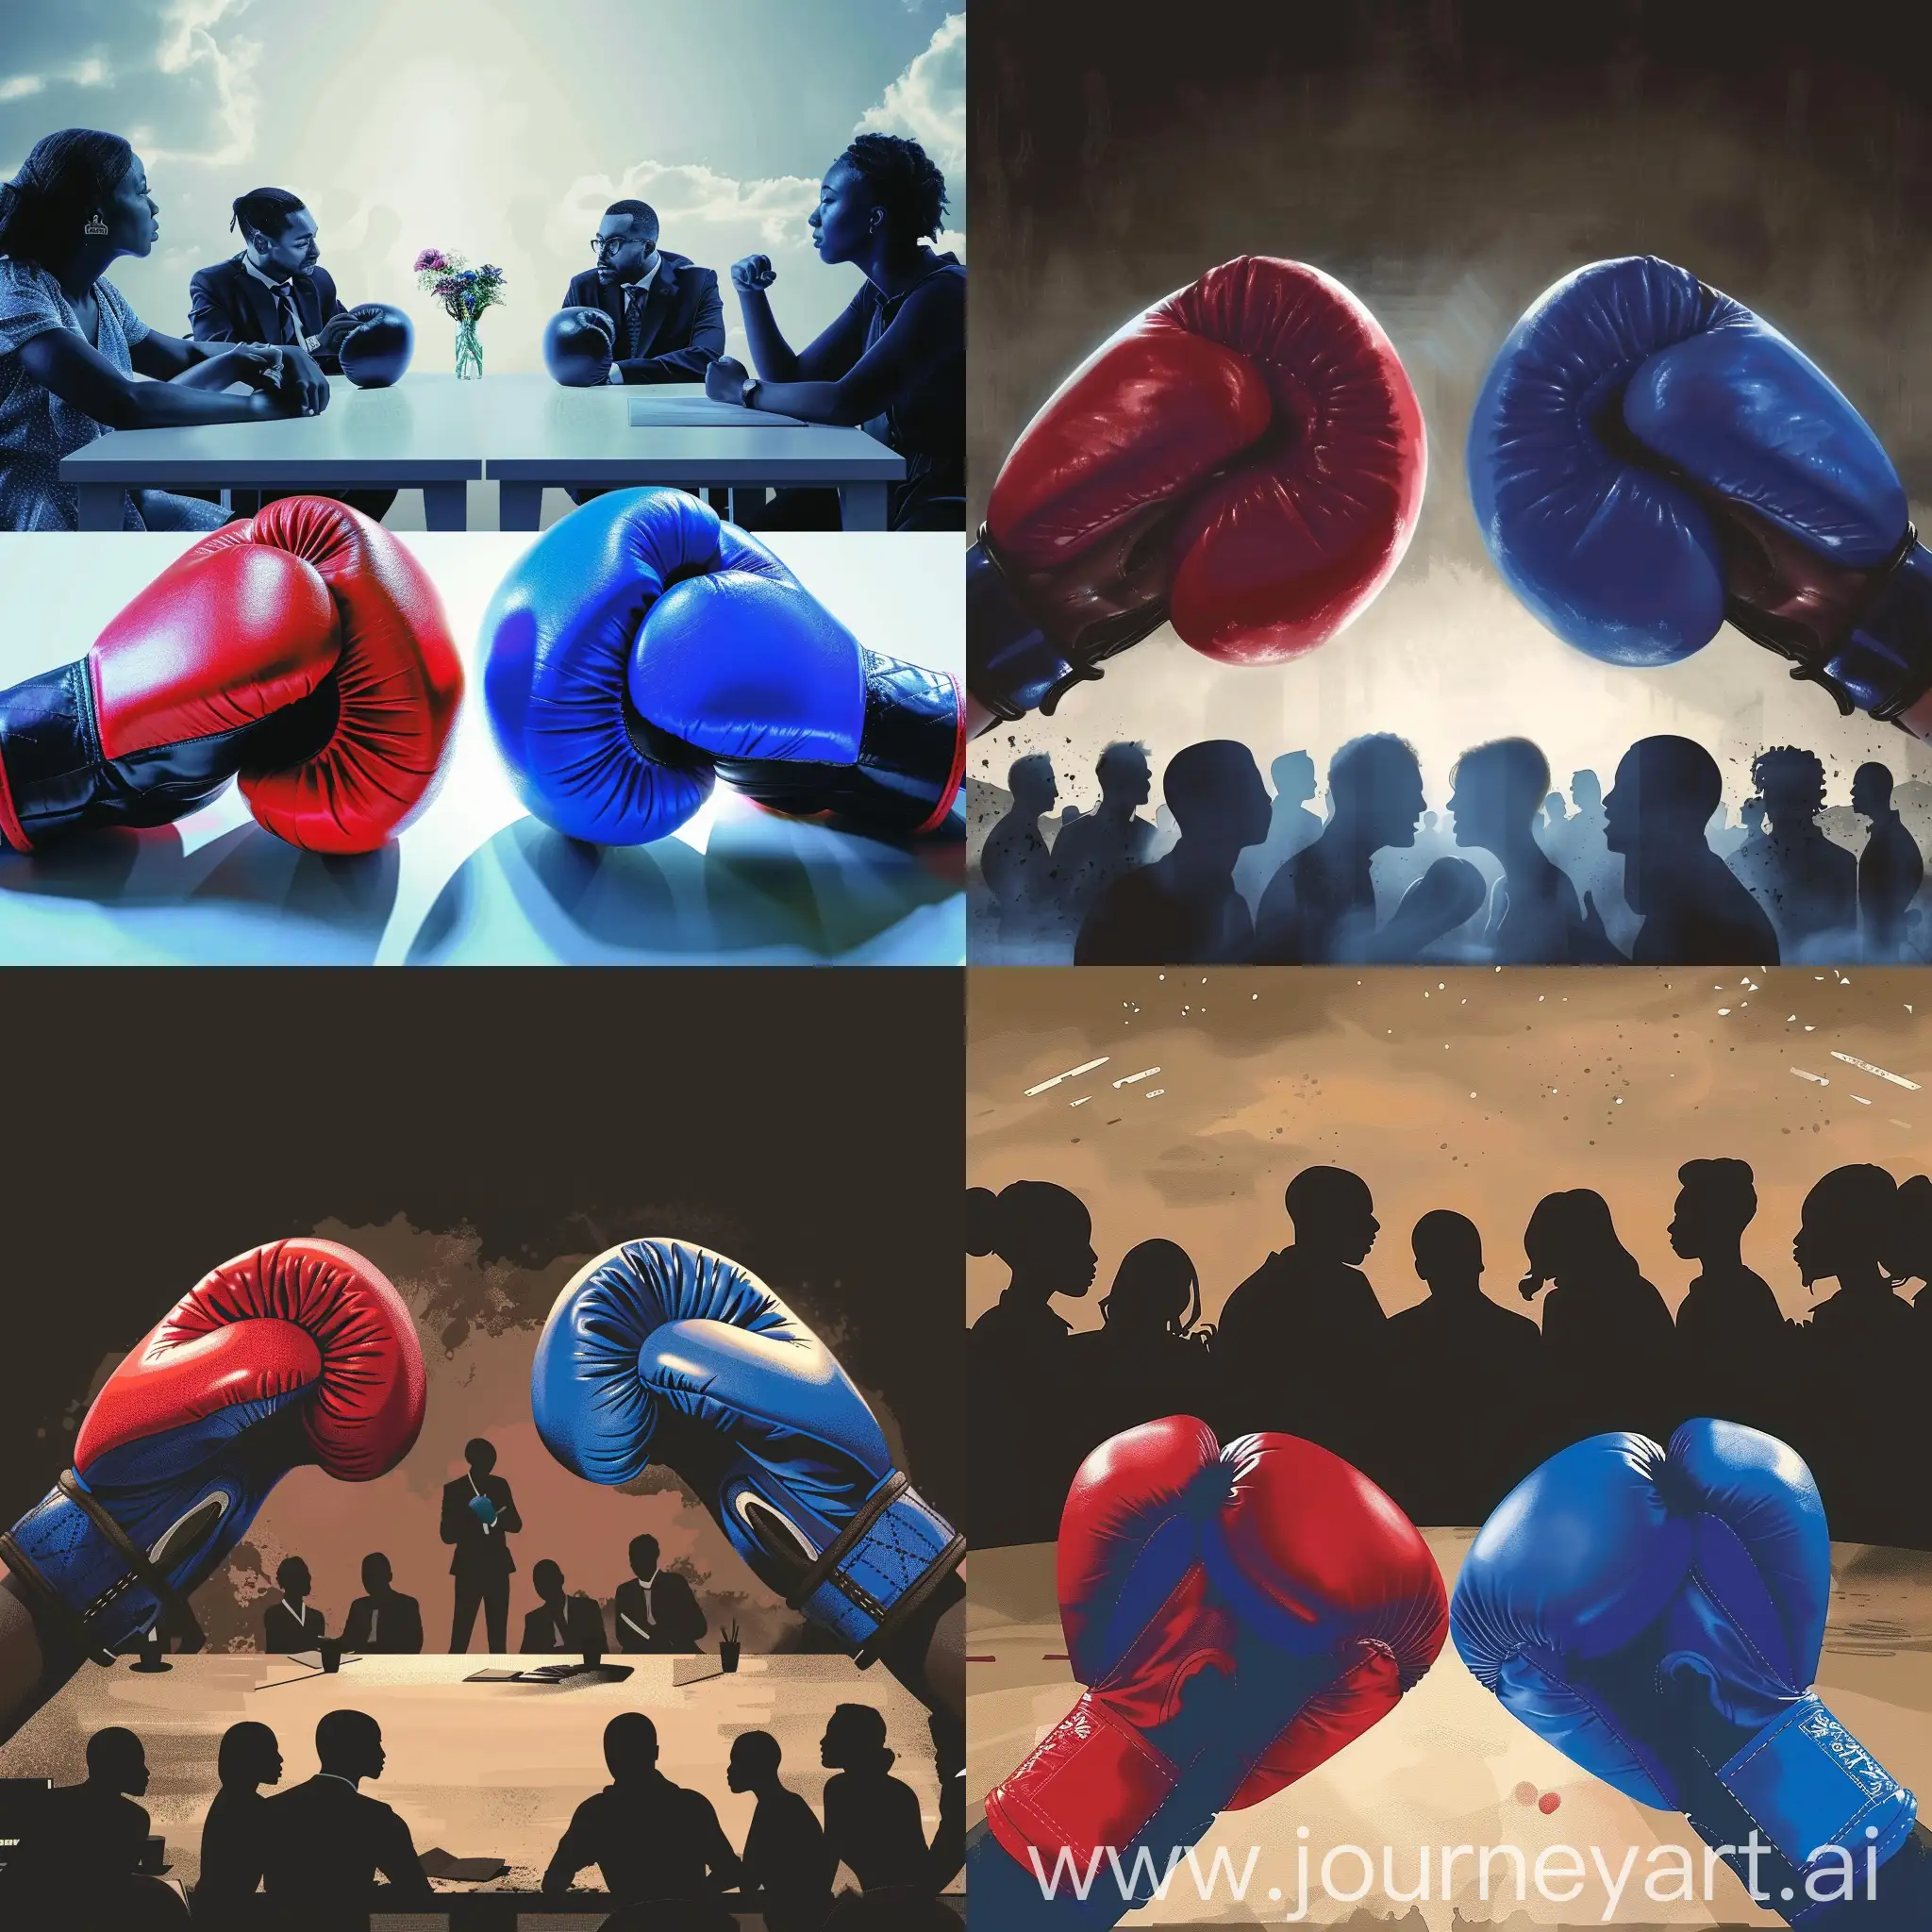 a poster, style realistic about a debate meeting called Apéro Dileme, where two ideas are fighting. I want to have two boxe gloves, red and blue, with a fight scenario, black people in backgroung discussing  with impacting messages